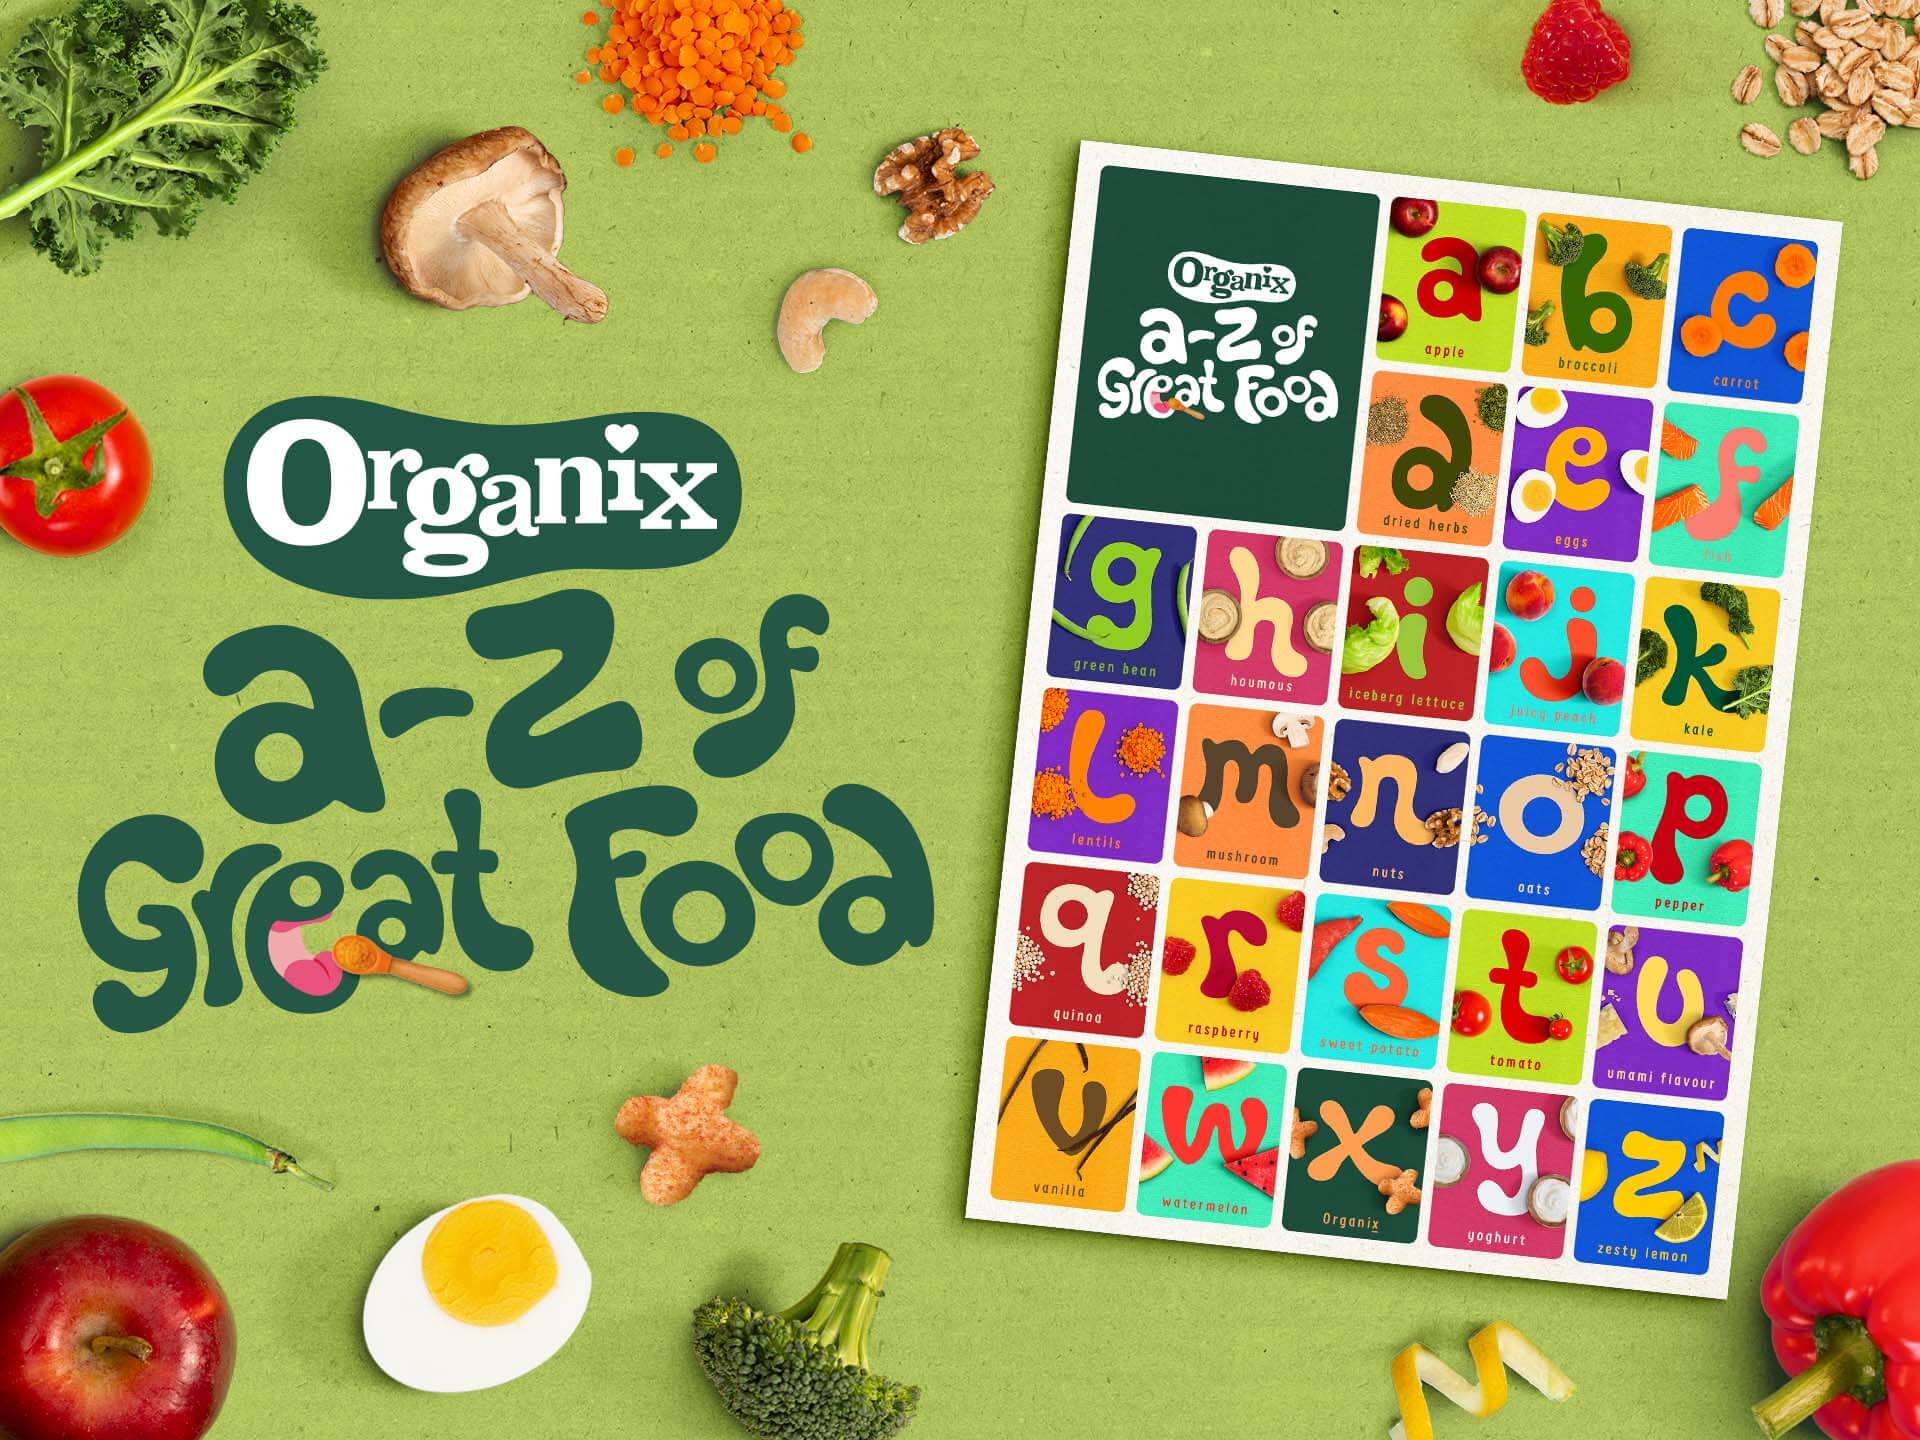 Organix A to Z of Great Food wall chart and ingredients